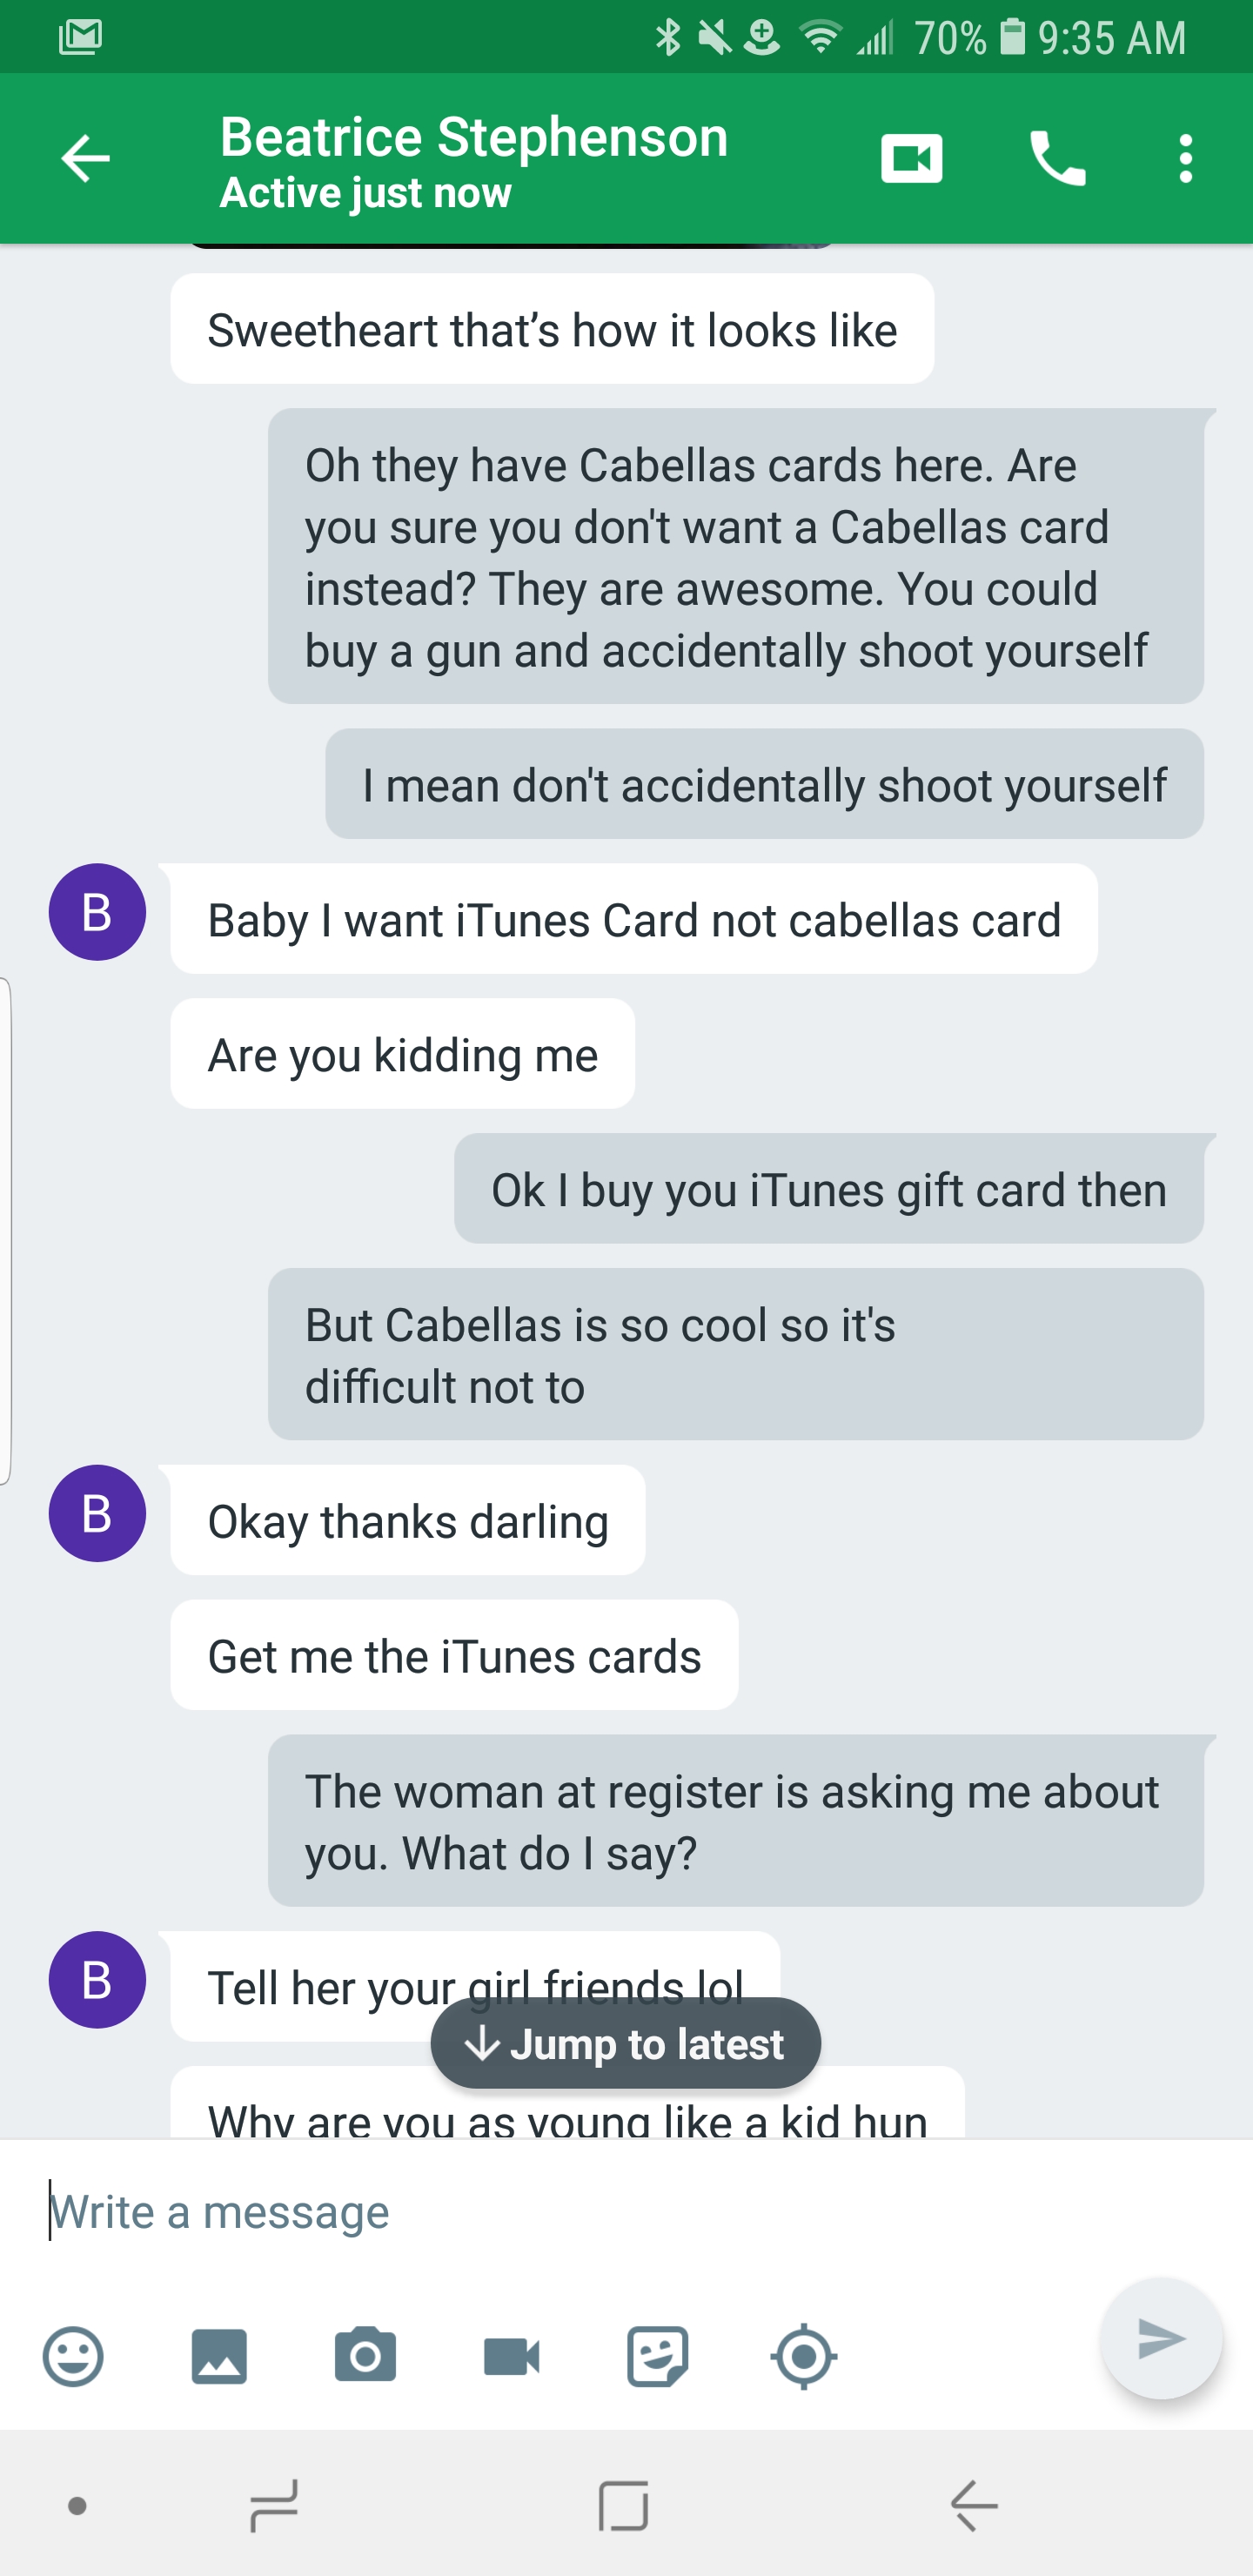 trolling conversation - 4 70% 9.35 Am 8 Beatrice Stephenson Active just now Sweetheart that's how it looks Oh they have Cabellas cards here. Are you sure you don't want a Cabellas card instead? They are awesome. You could buy a gun and accidentally shoot 